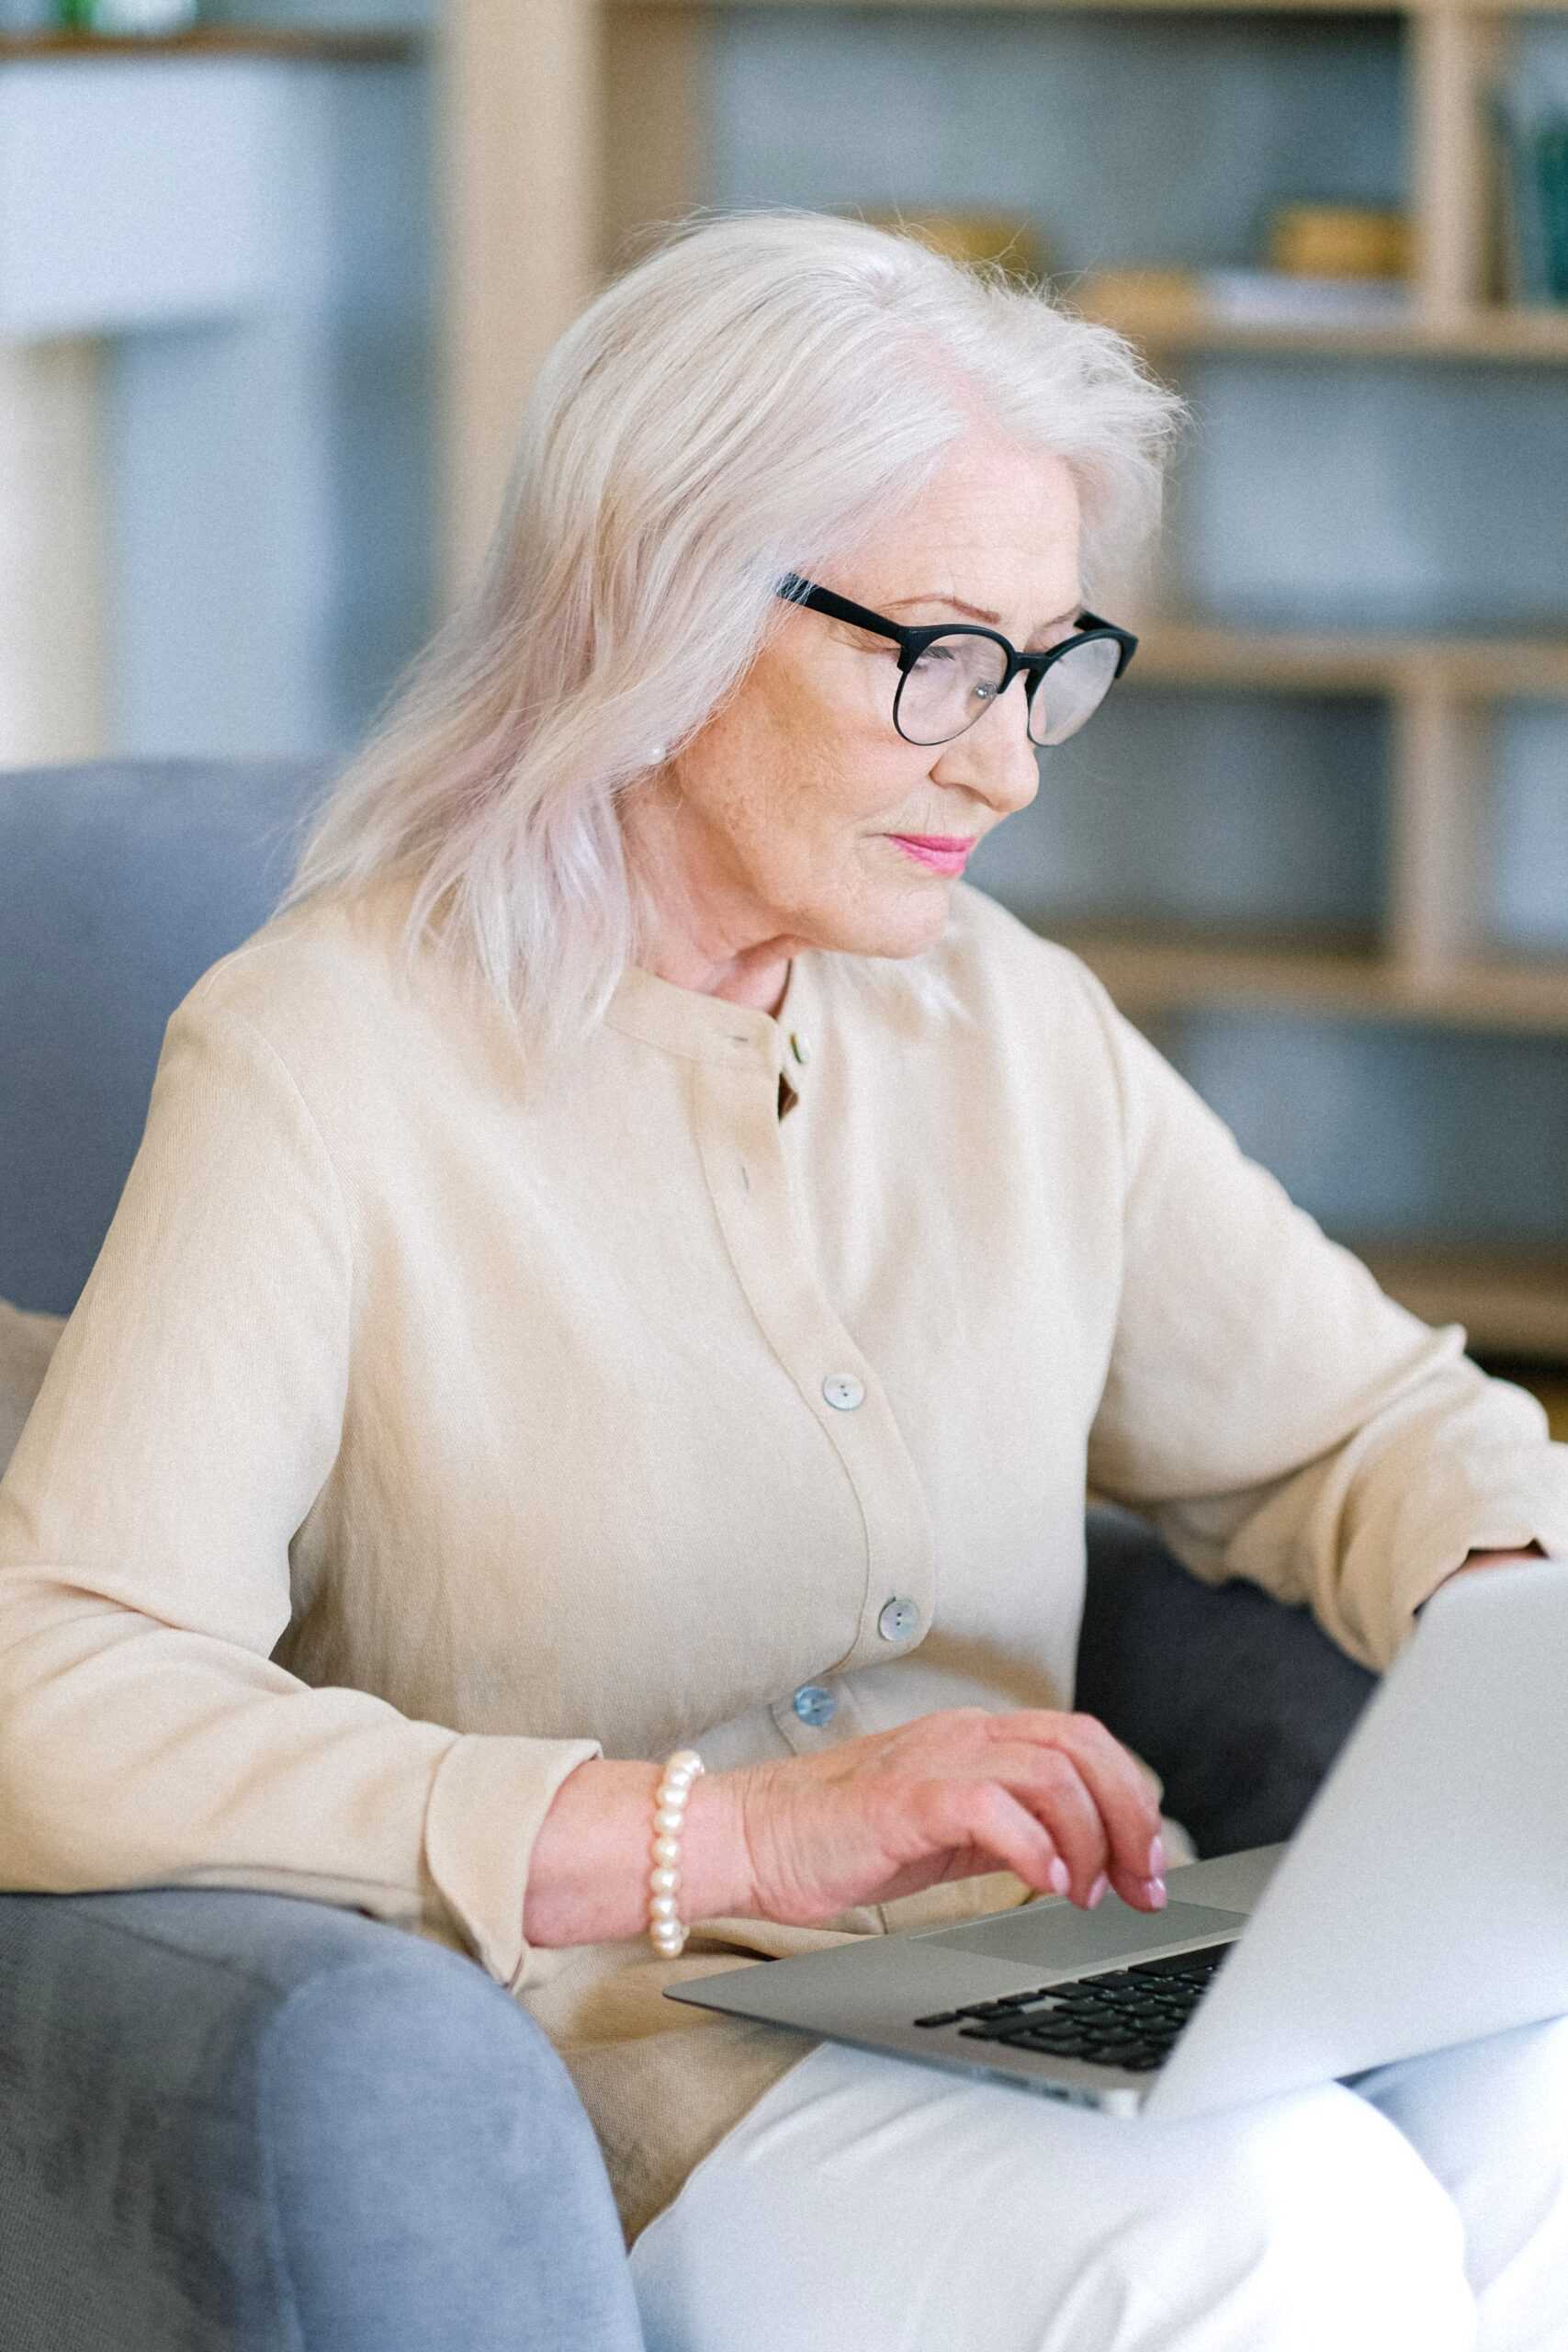 Senior woman researching hearing aids on a laptop